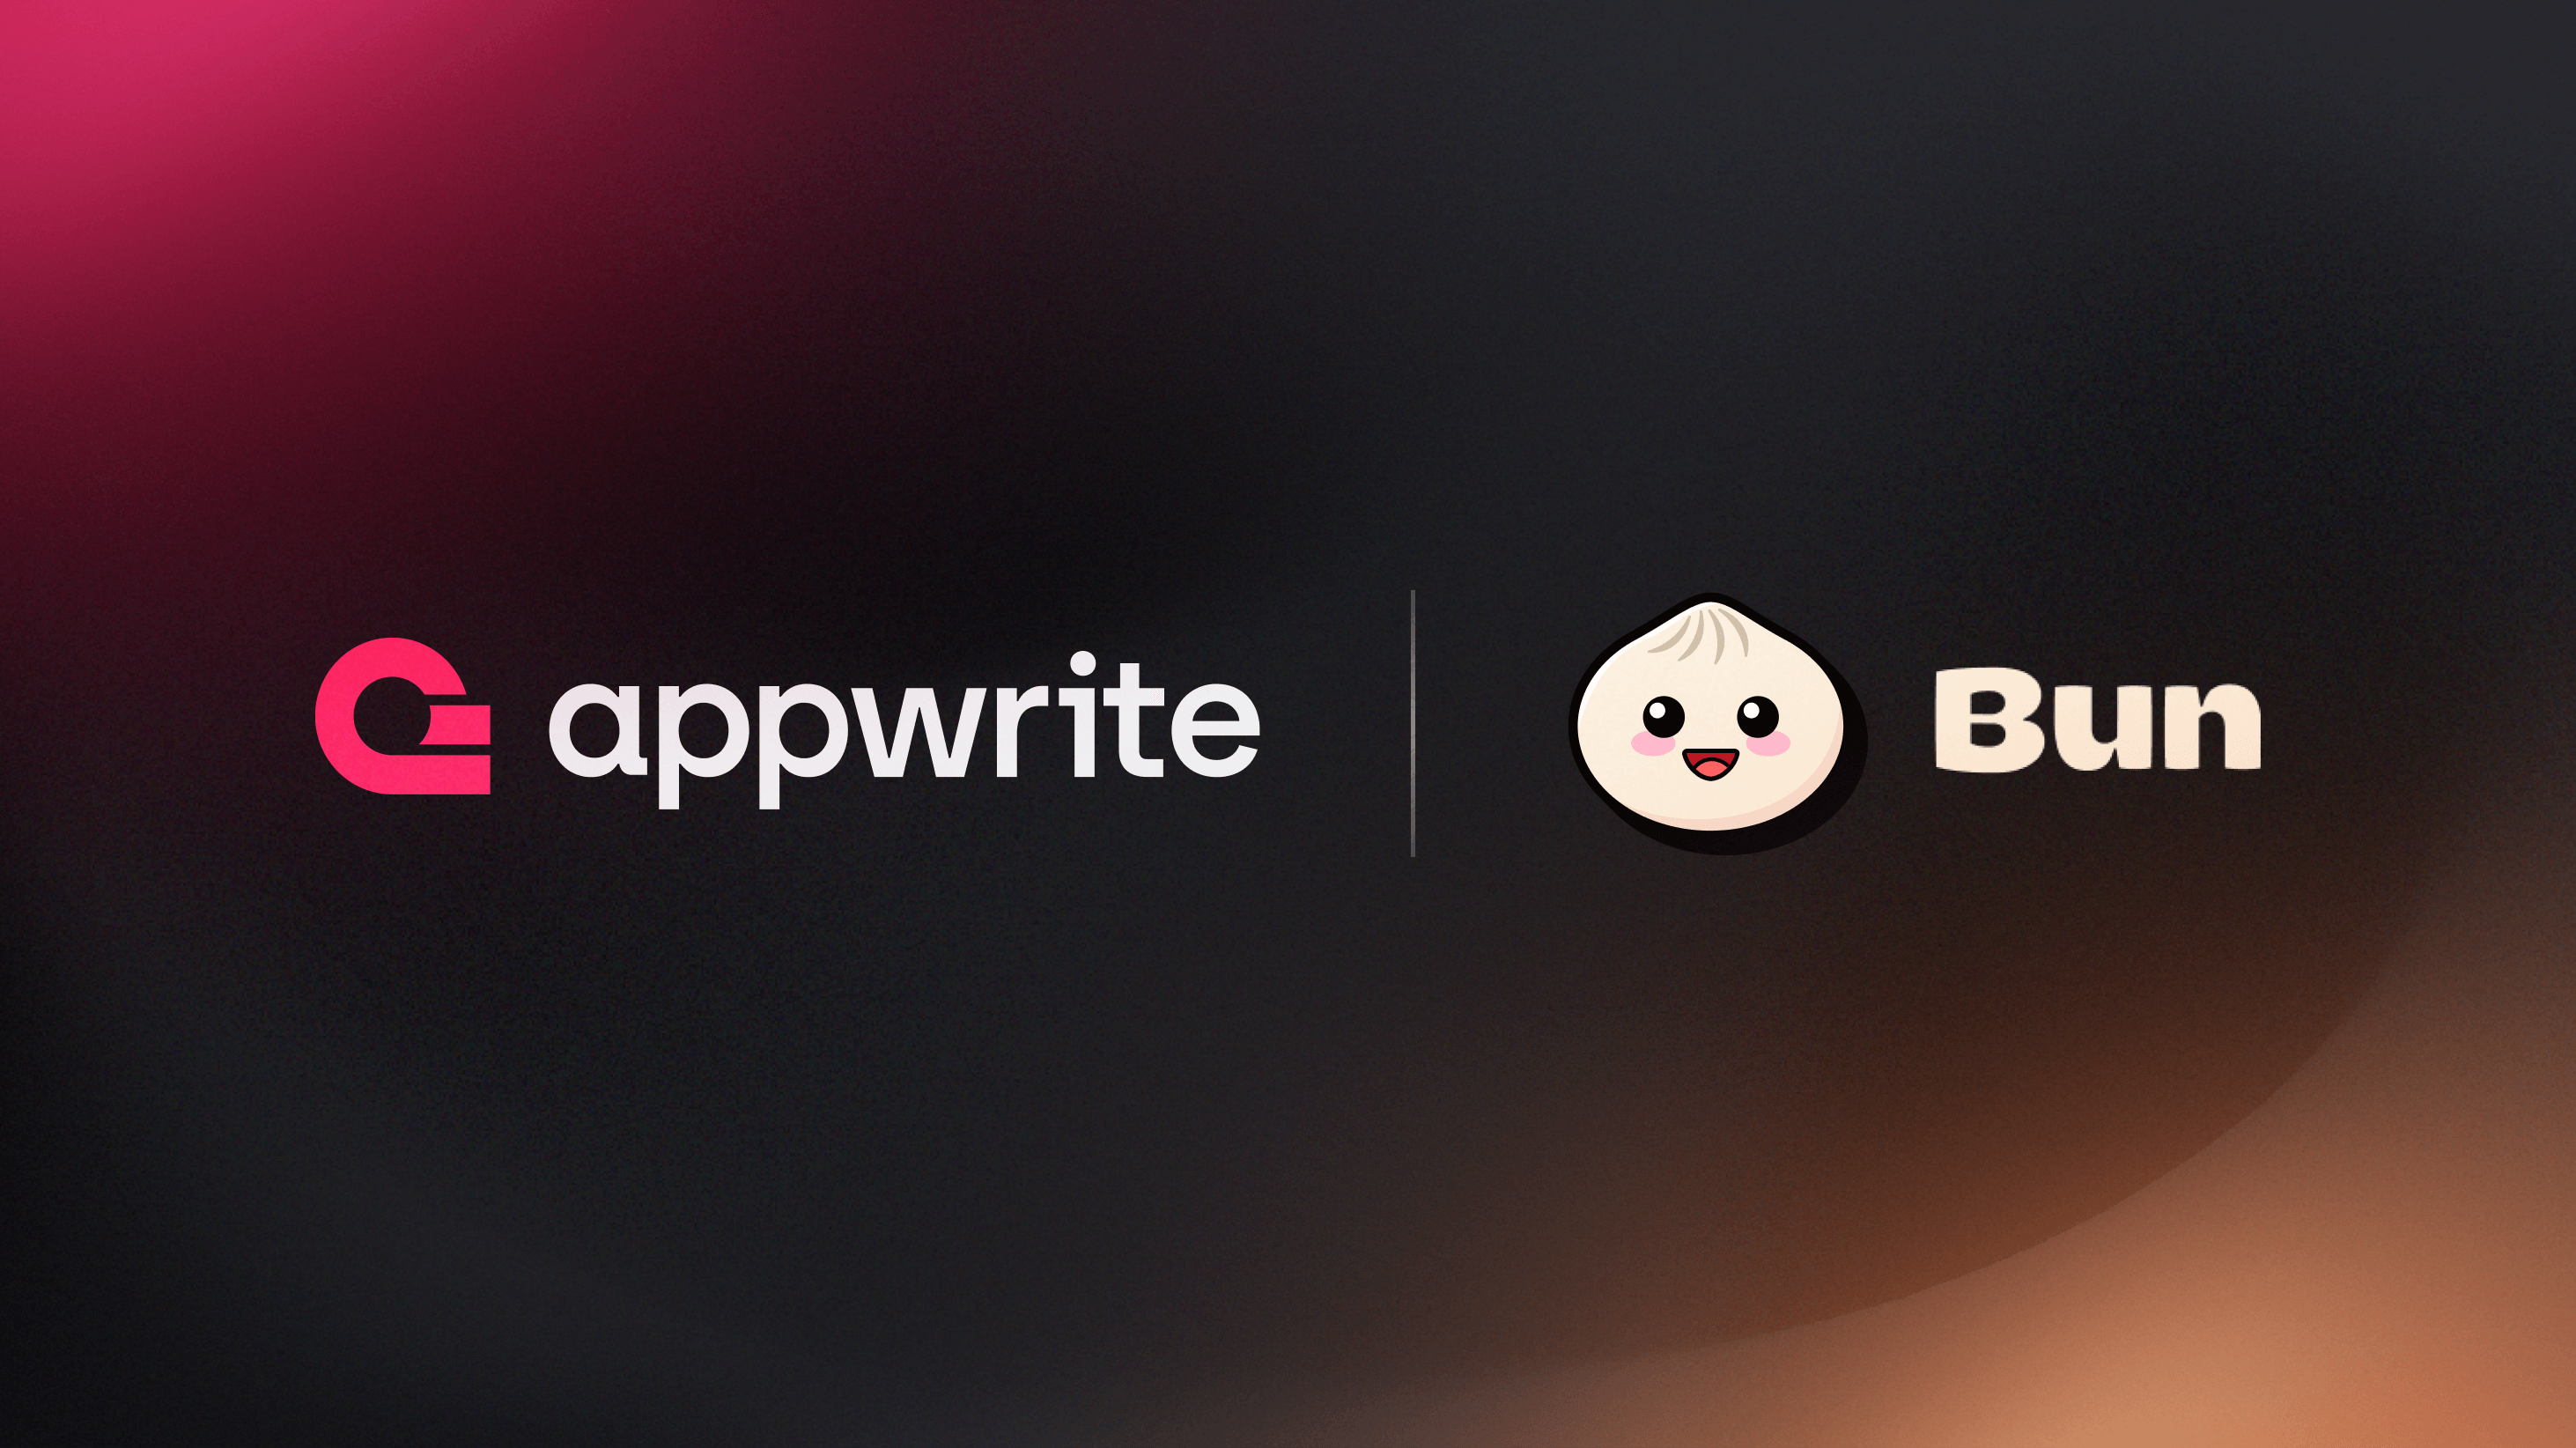 Building apps with Bun and Appwrite